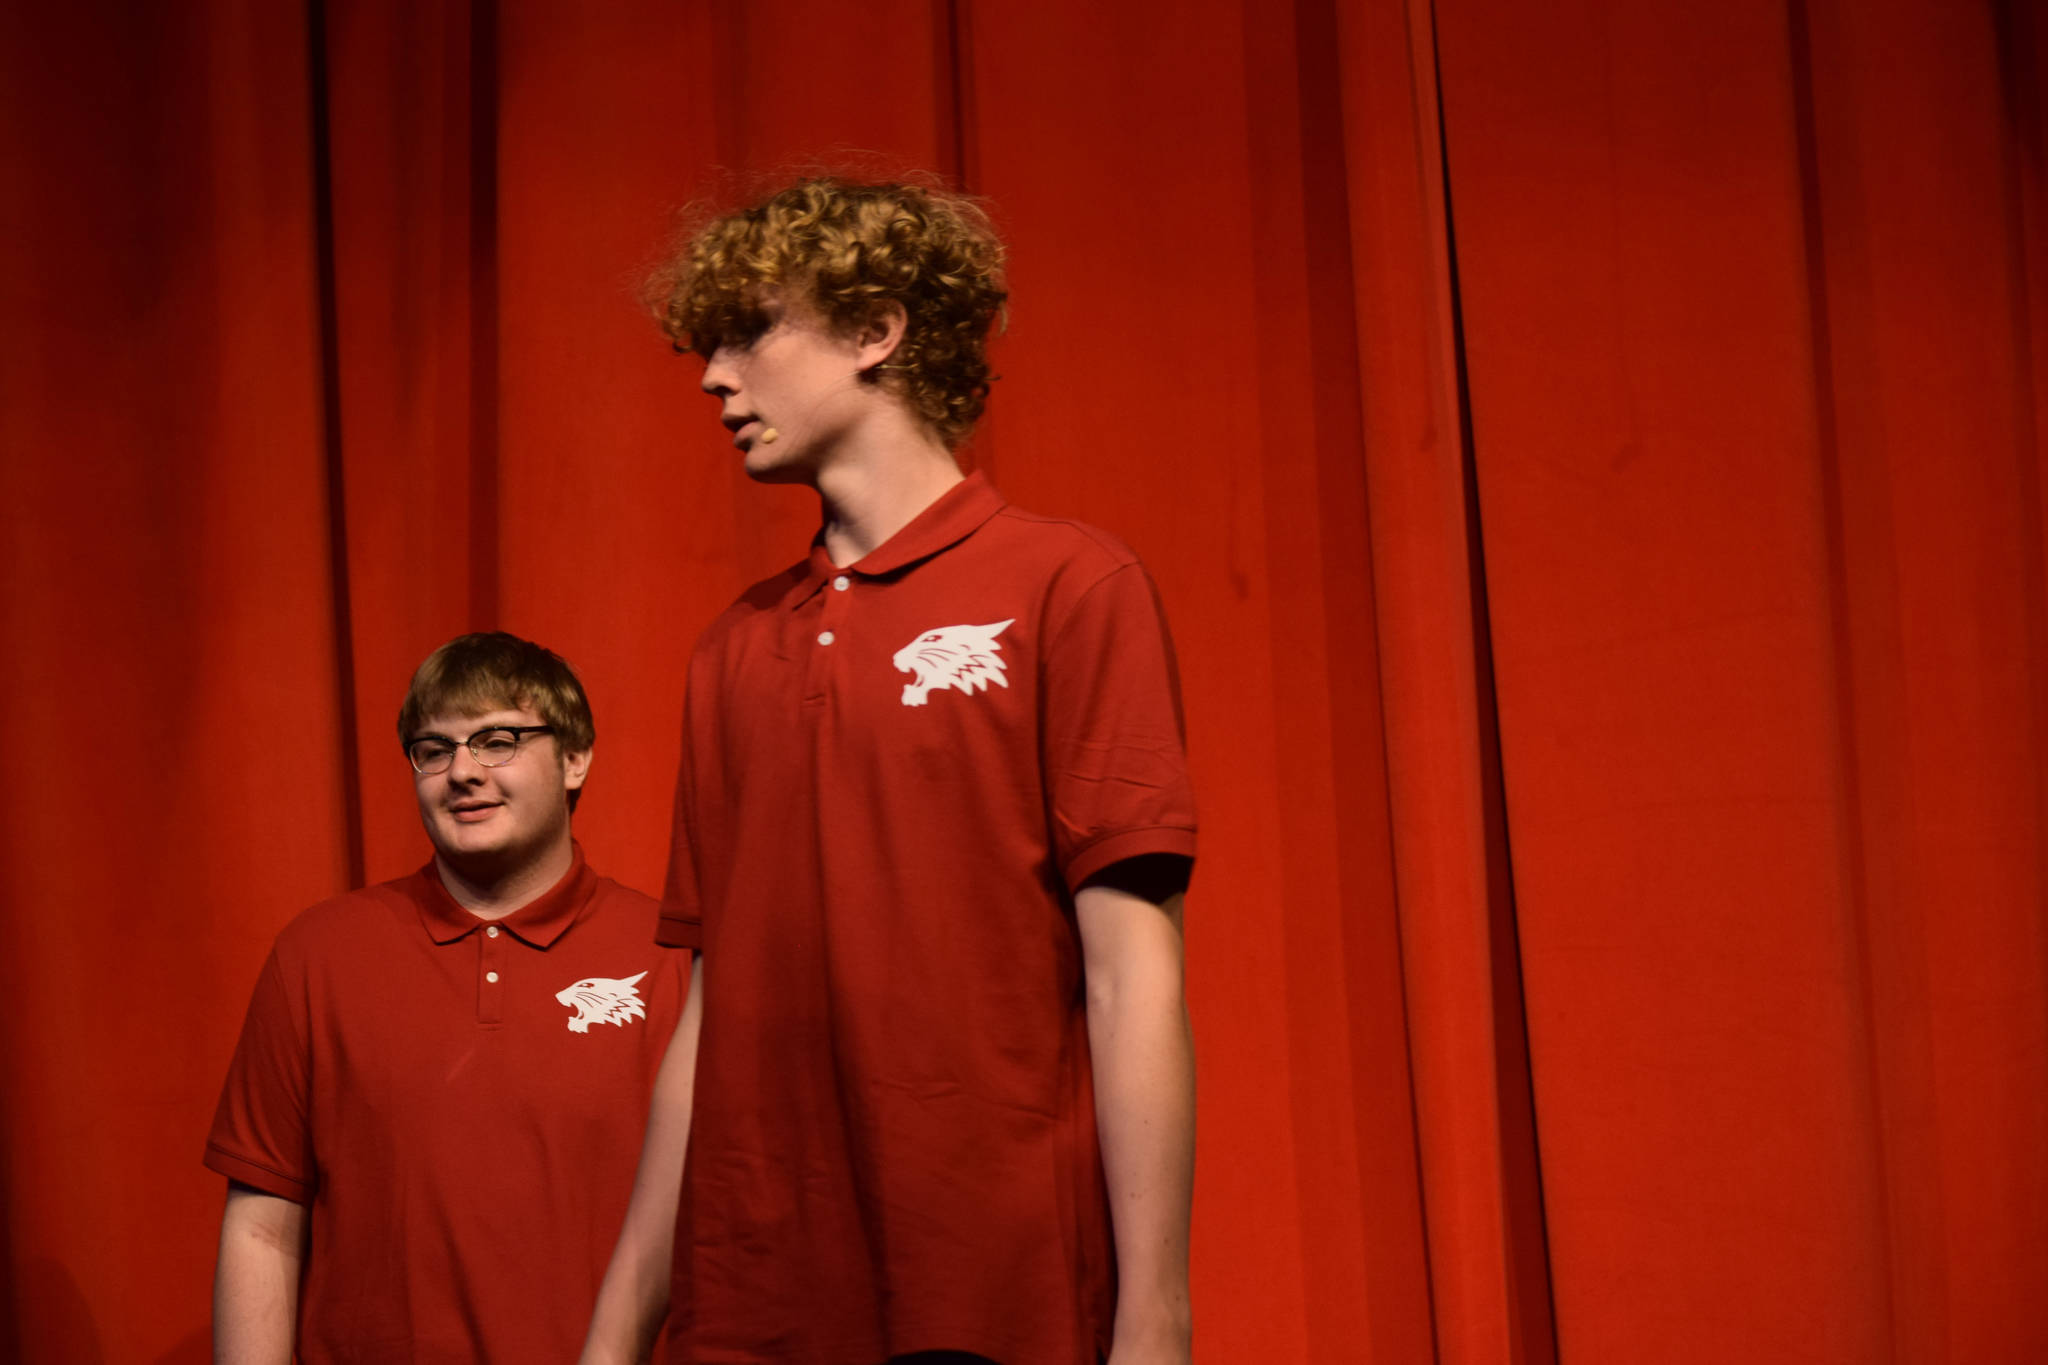 Foreground: Brady Bostic sings onstage as his character Chad Danforth in the Nikiski Middle/High School’s spring production of “High School Musical” in Nikiski, Alaska, on Wednesday May 5, 2021. (Camille Botello / Peninsula Clarion)